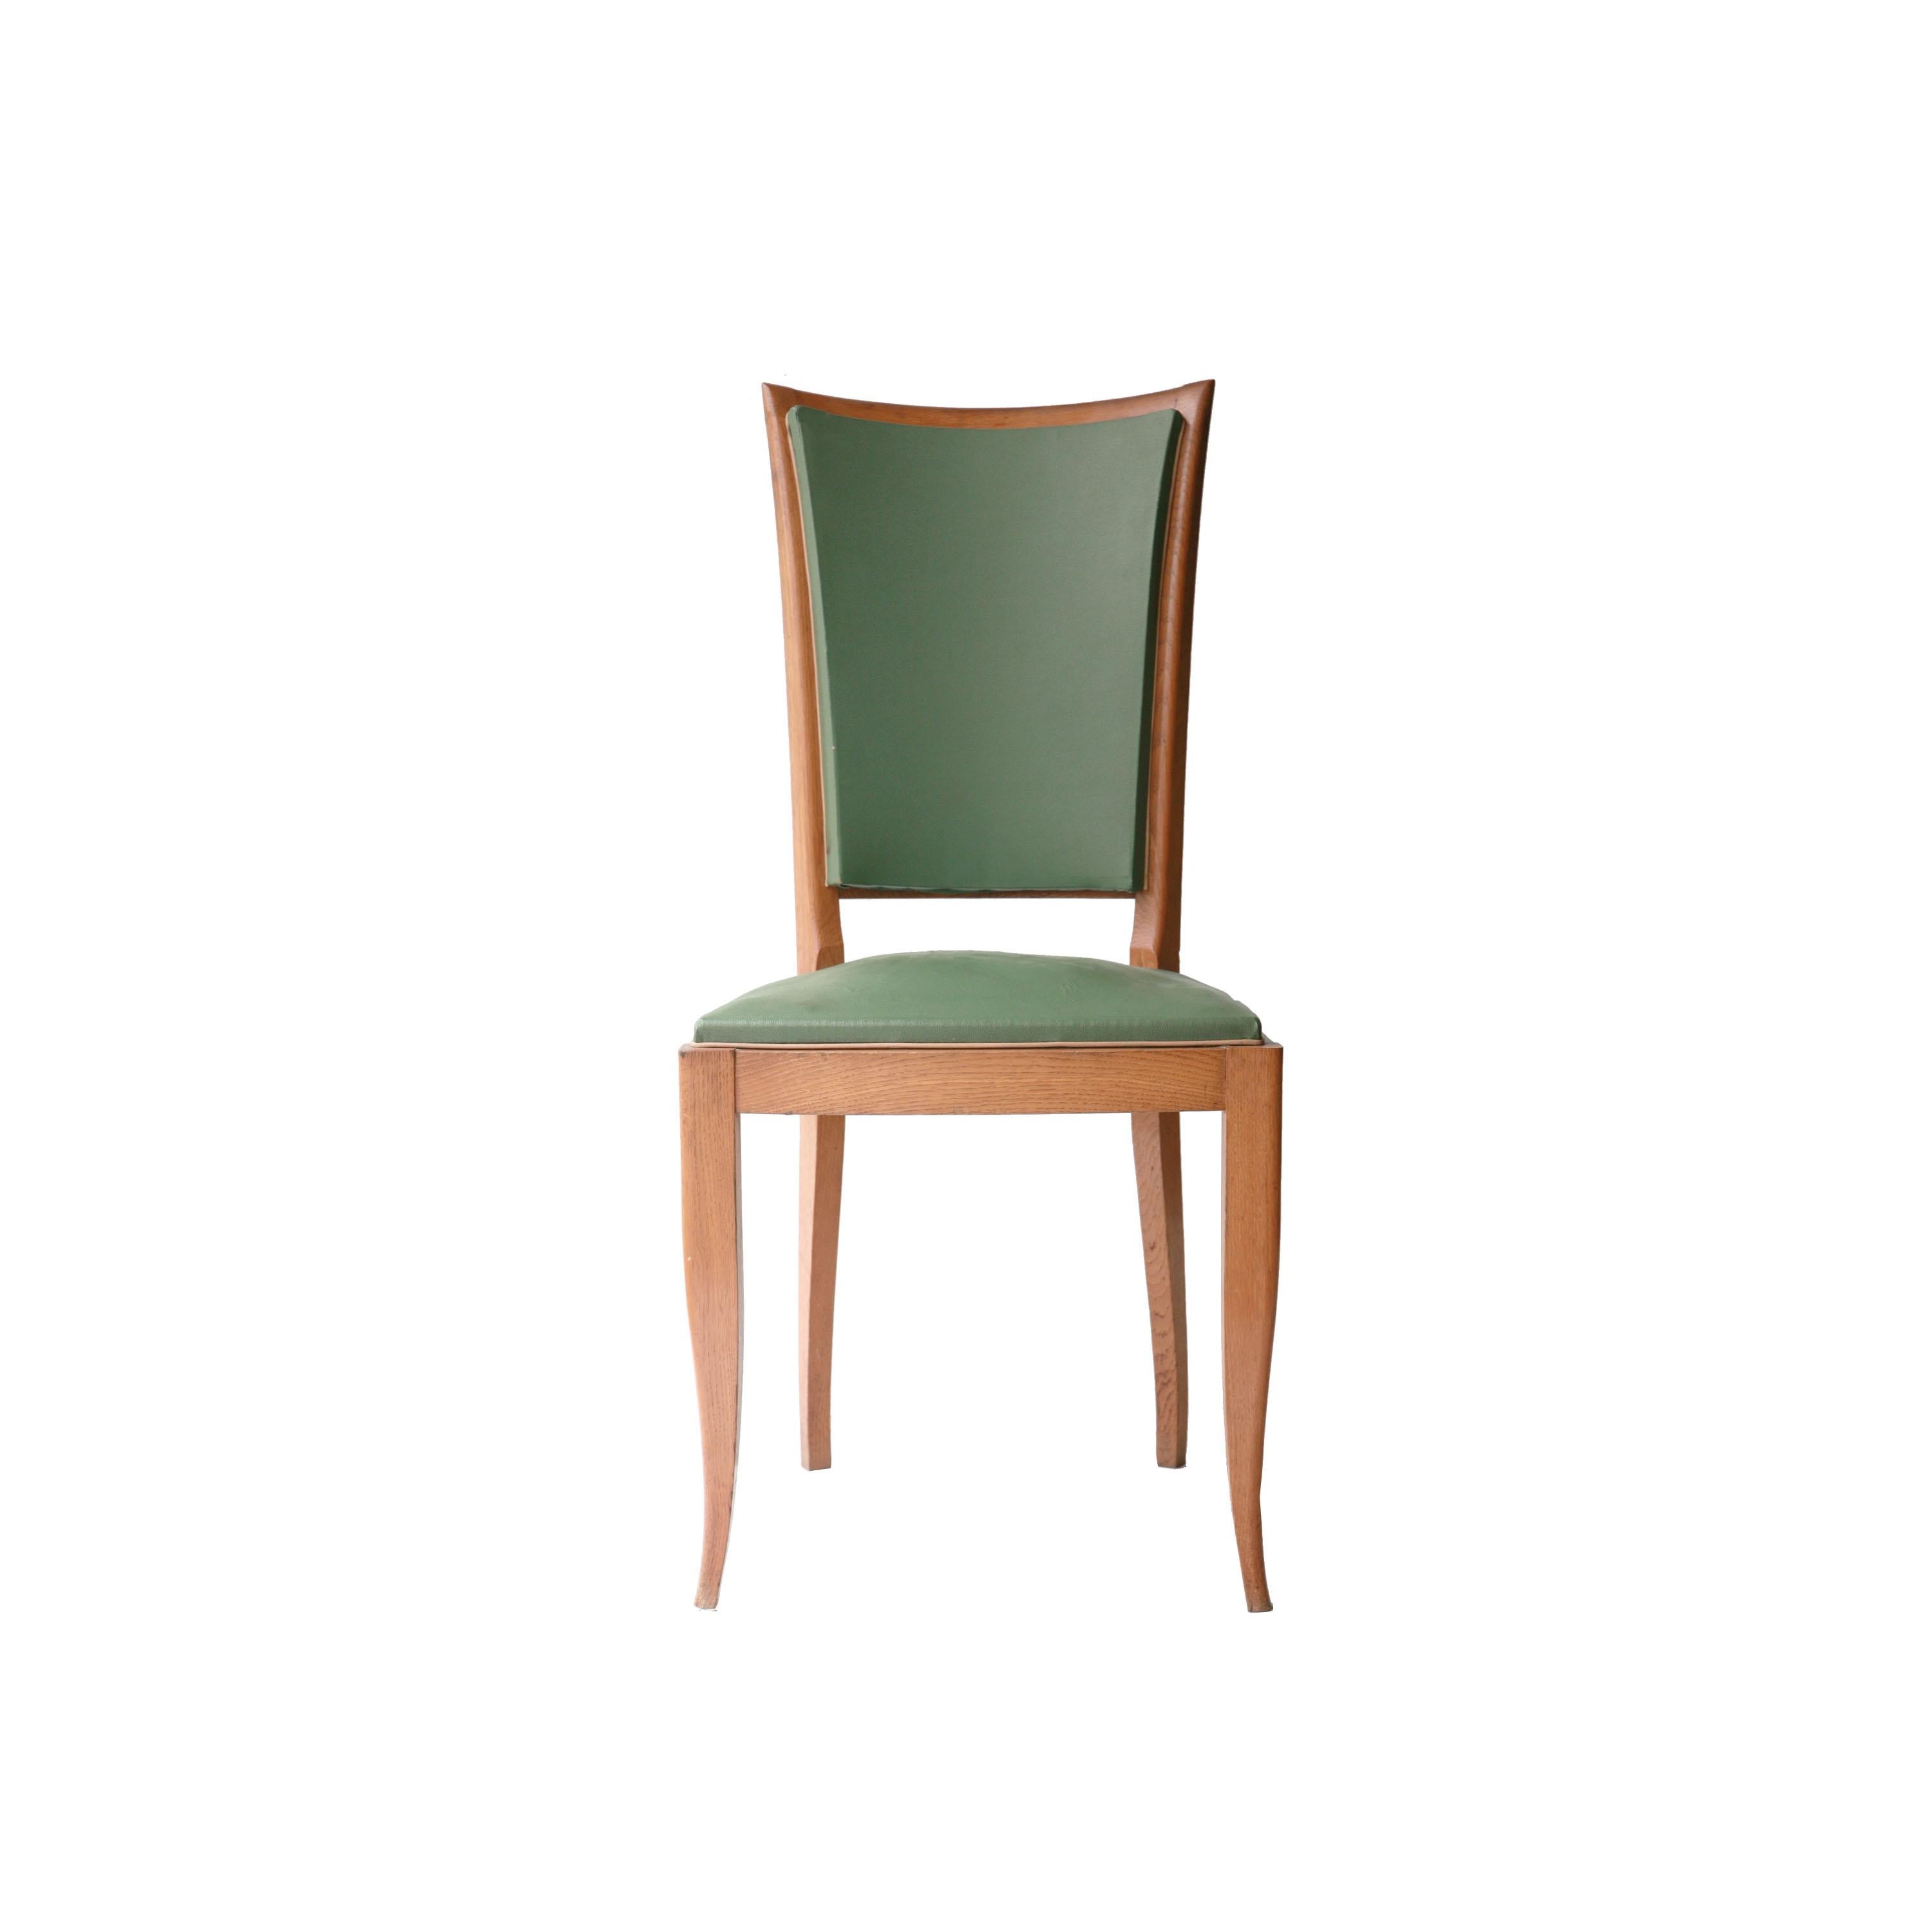 Art Deco Interwar Green Leatherette Wood Set of Six French Chairs, France, 1940 For Sale 2